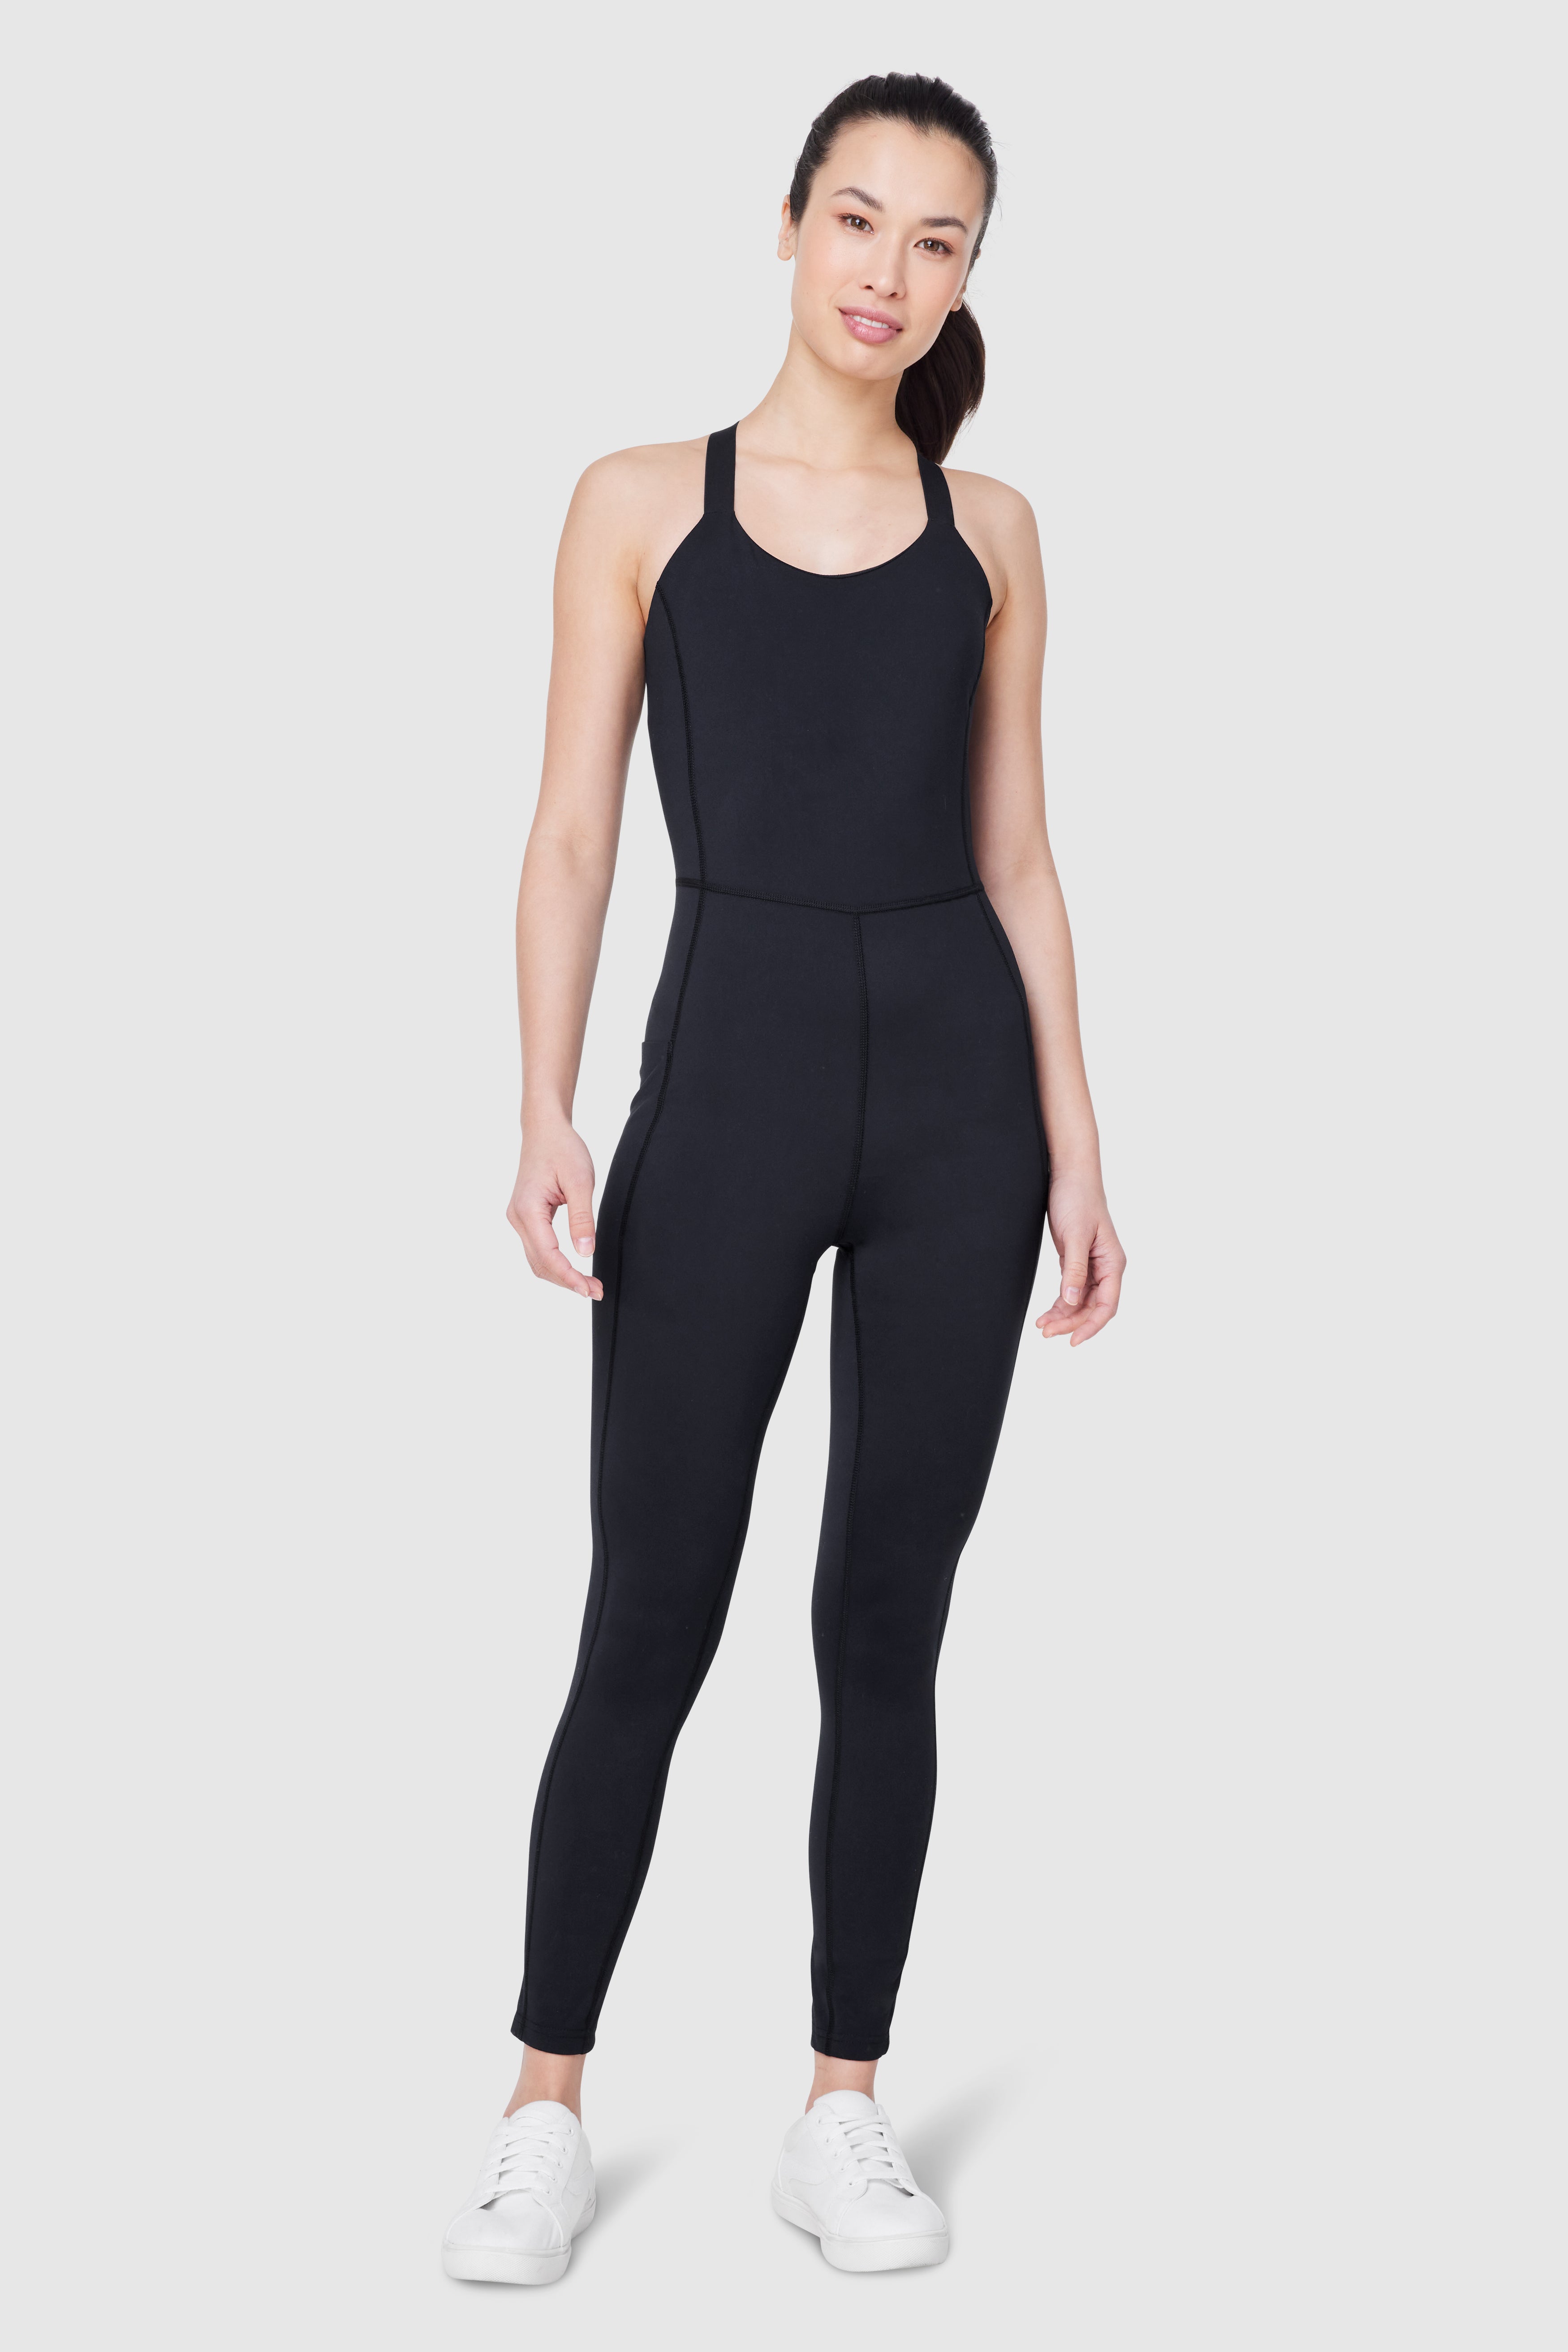 All in Motion Women's Stretch Woven Sleeveless Jumpsuit - All in